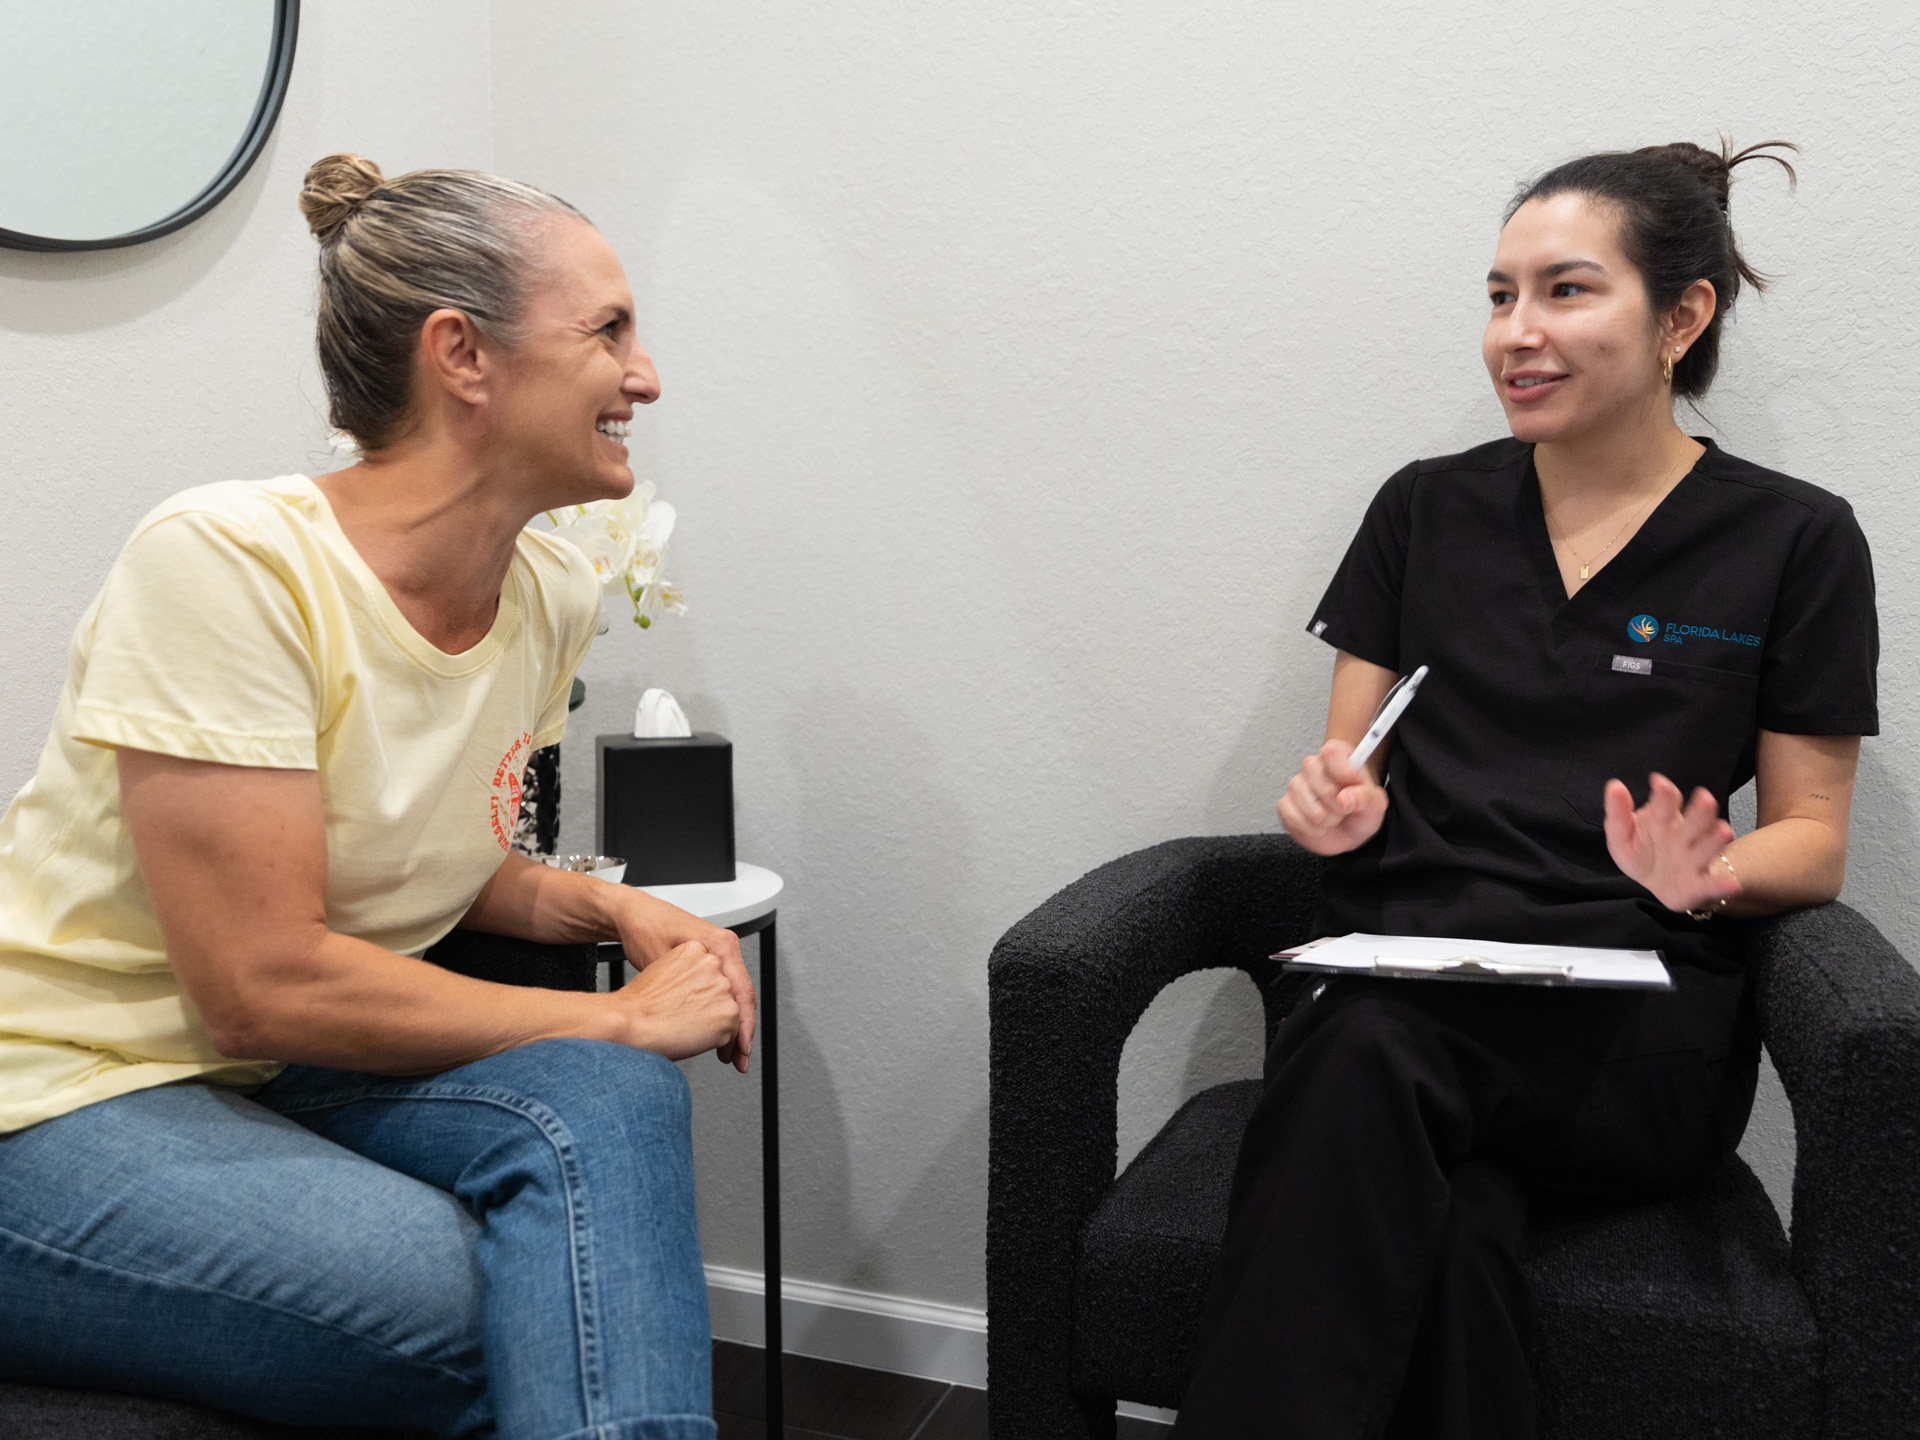 a client discusses emsculpt with her medical professional